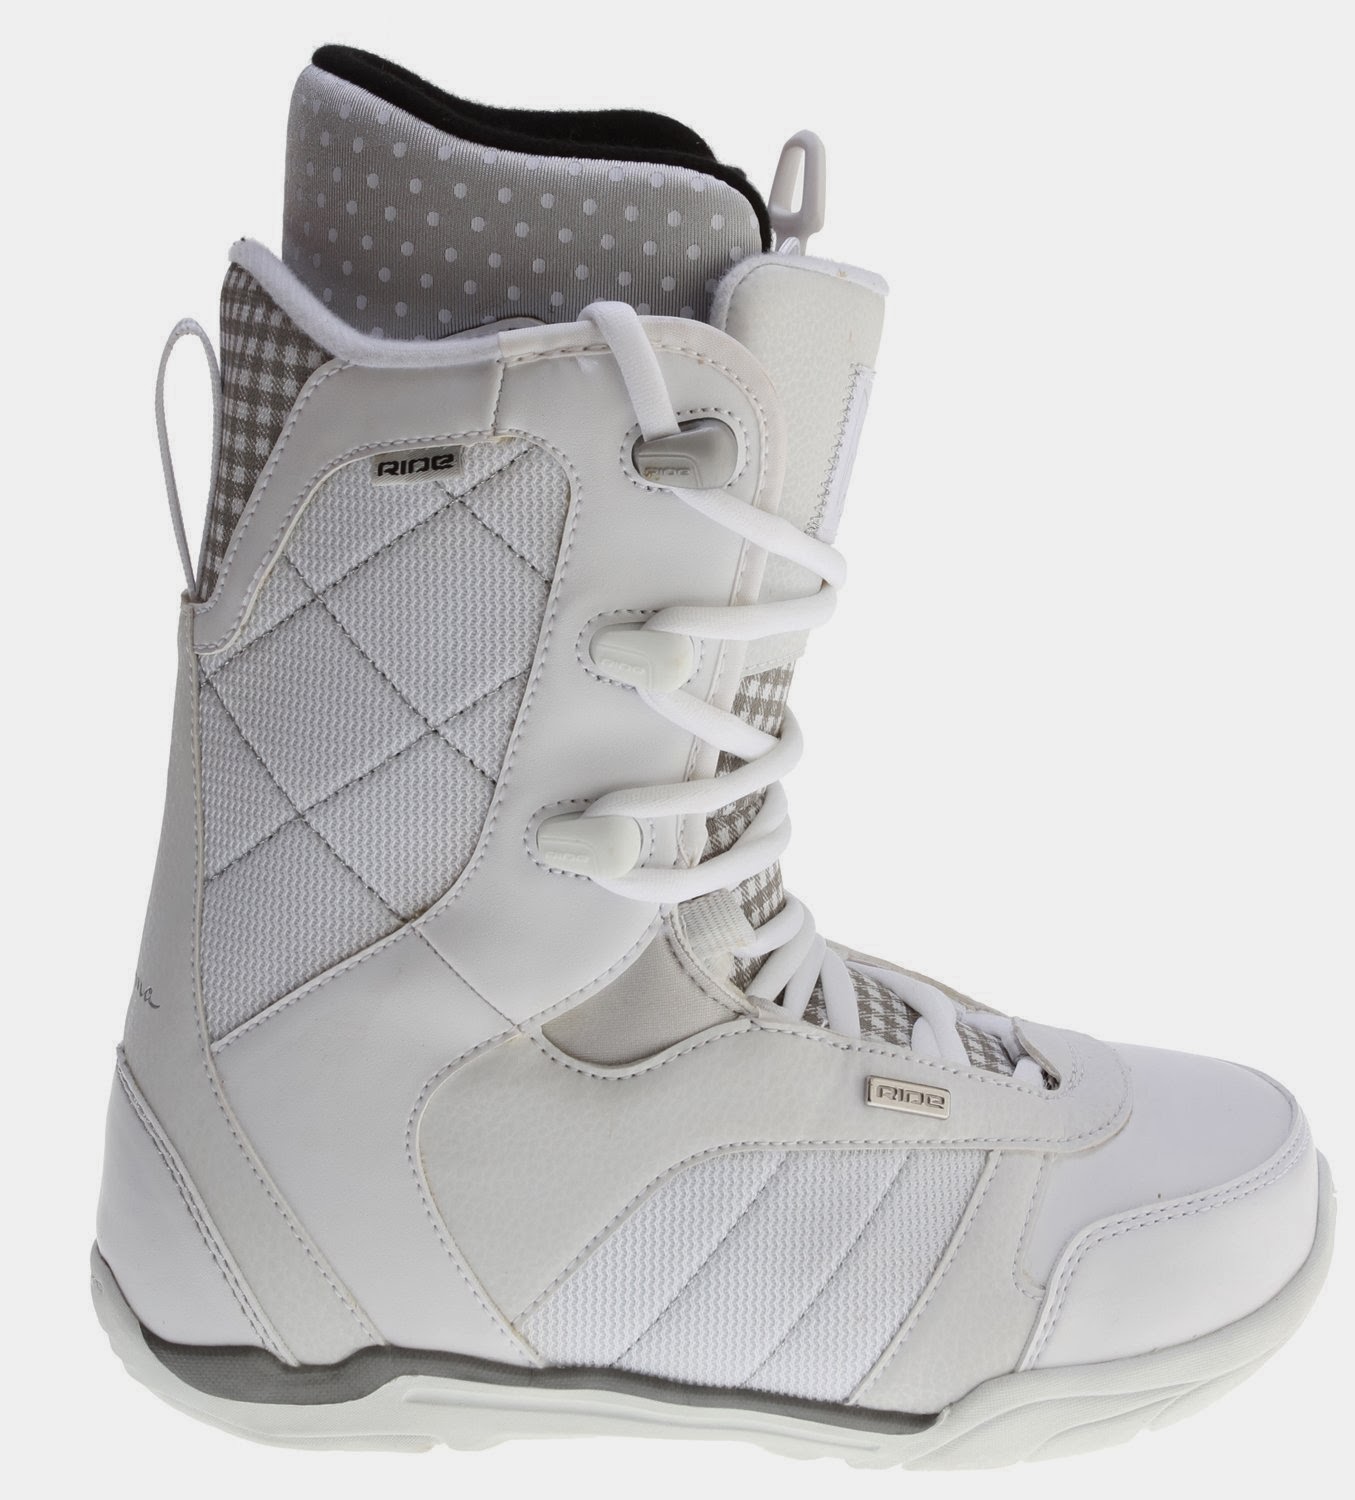 Snowboard Boots Ride Donna Snowboard Boots White Womens